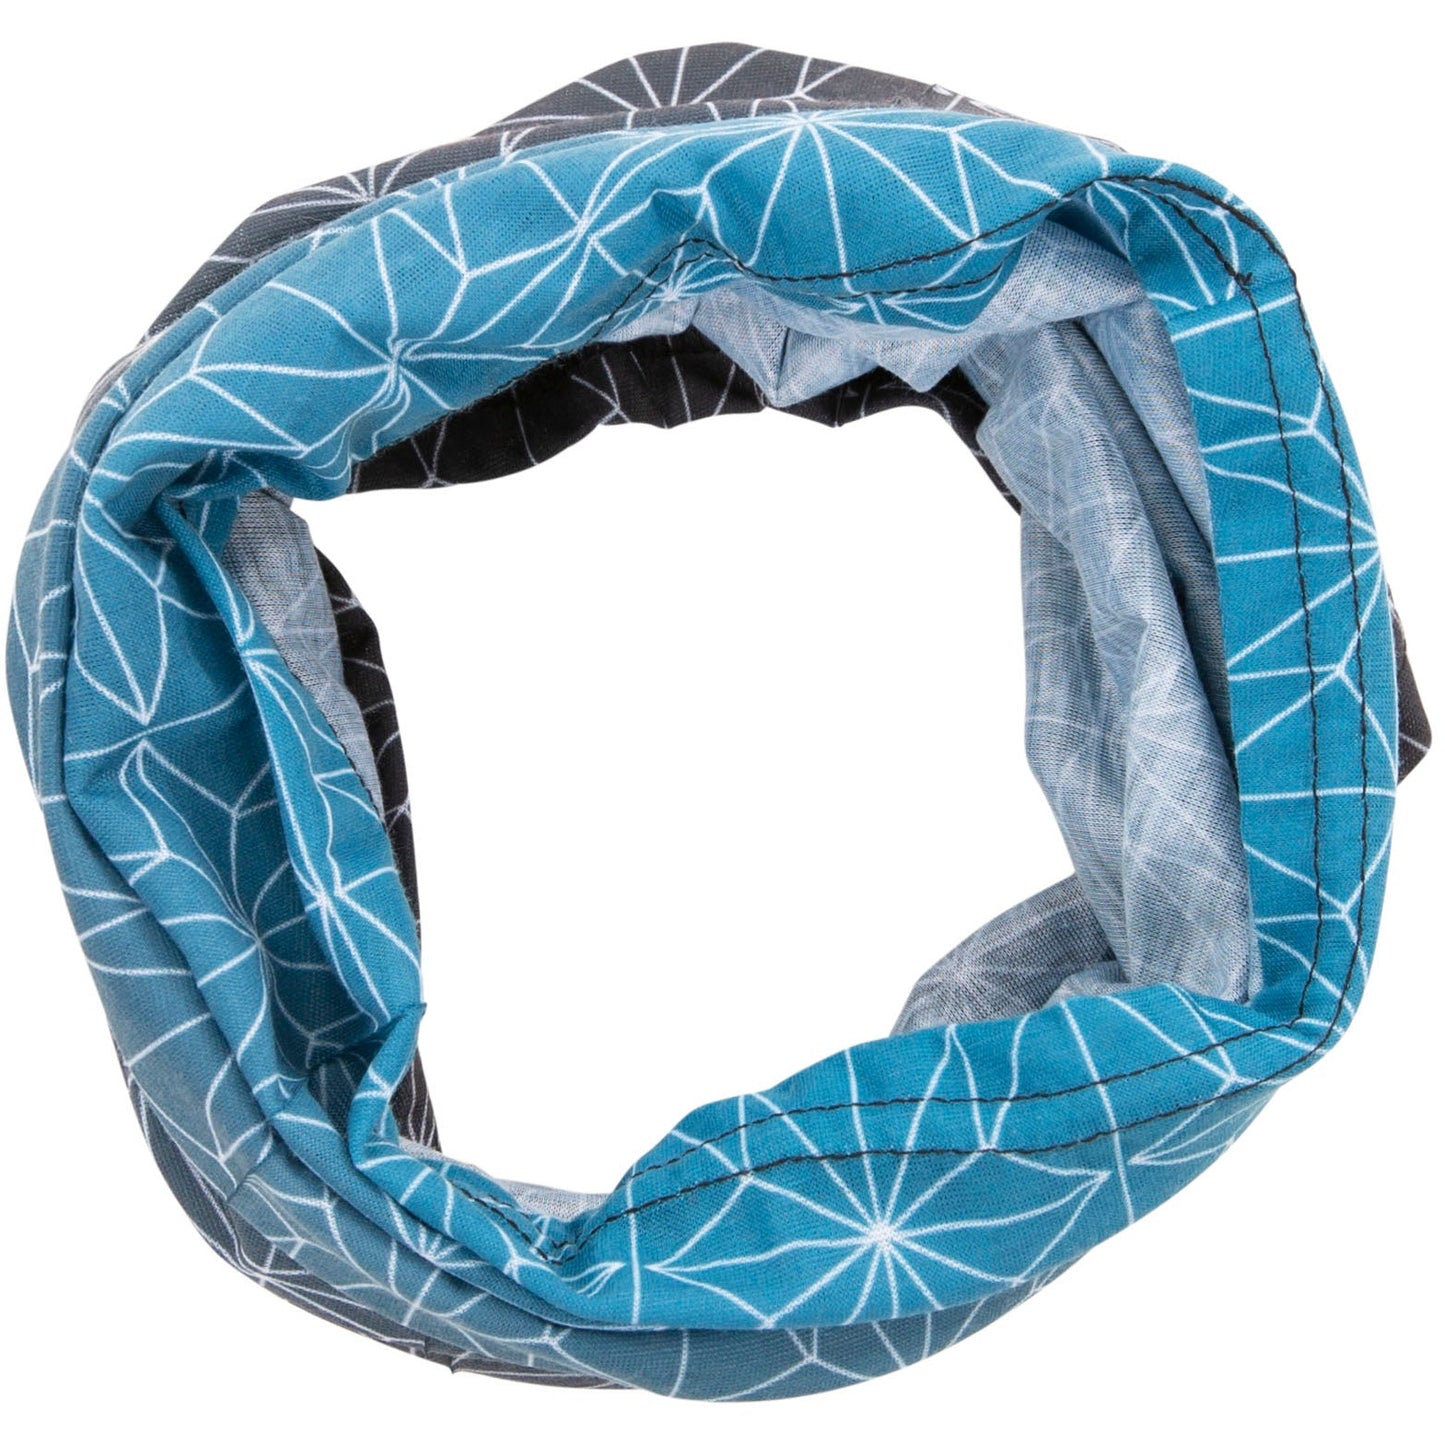 Busby Adults Neck Warmer / Face Covering in Geo Gradient Print